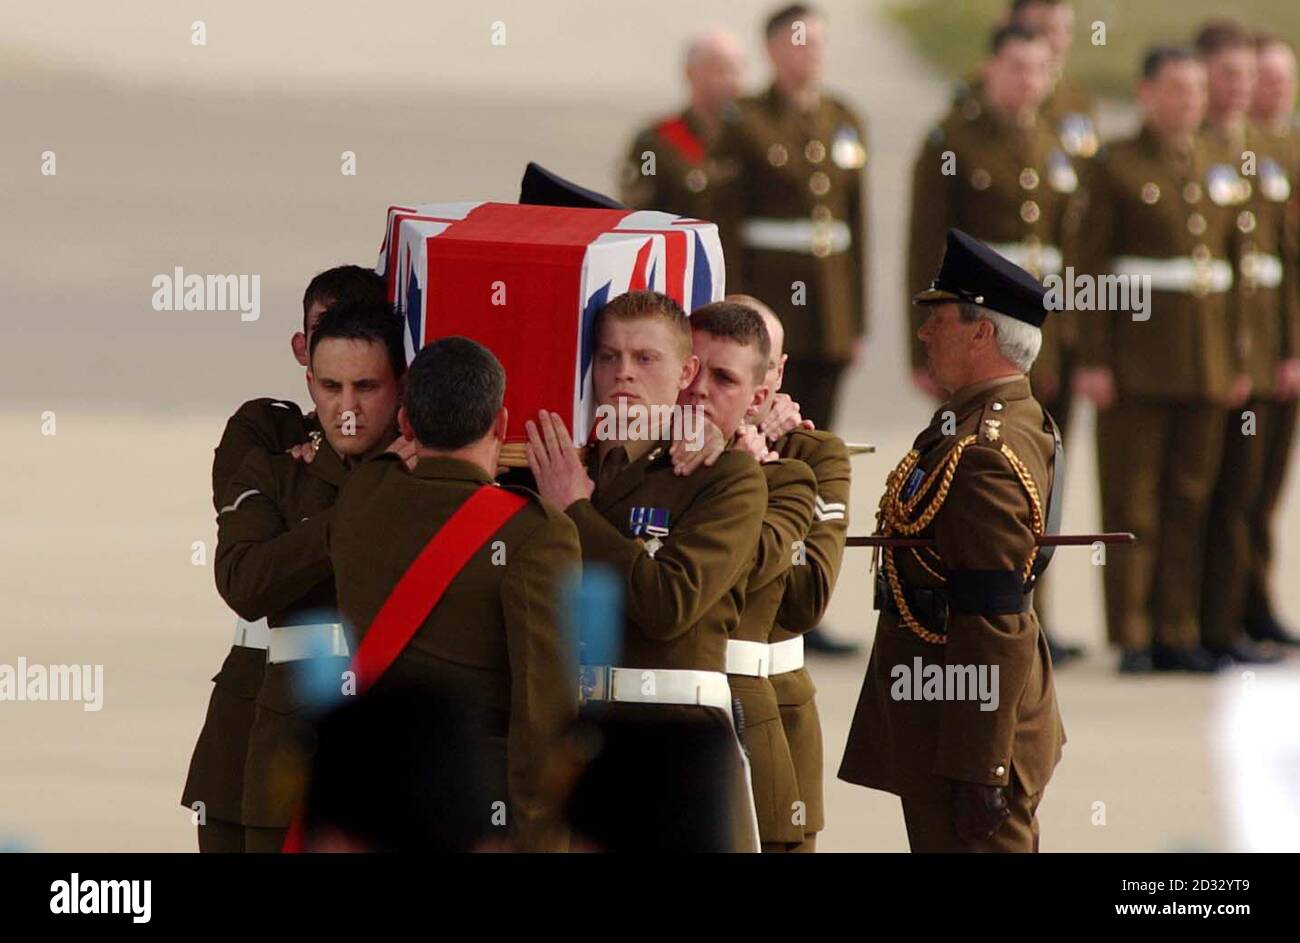 The body of Fusilier Kelan Turrington, from Haslingfield, Cambridgeshire, who at 18 was the youngest British serviceman to be killed since the conflict began, arrives at RAF Brize Norton.  *  A member of the Royal Regiment of Fusiliers, he was killed in action on April 6 near Basra. He joined the Army in September 2001. The bodies of seven British servicemen killed in the Iraq conflict were arriving at the Oxfordshire air base for a solemn repatriation ceremony. The return of the seven bodies today brings the number of killed servicemen repatriated to 28, leaving two of the 30 British fataliti Stock Photo